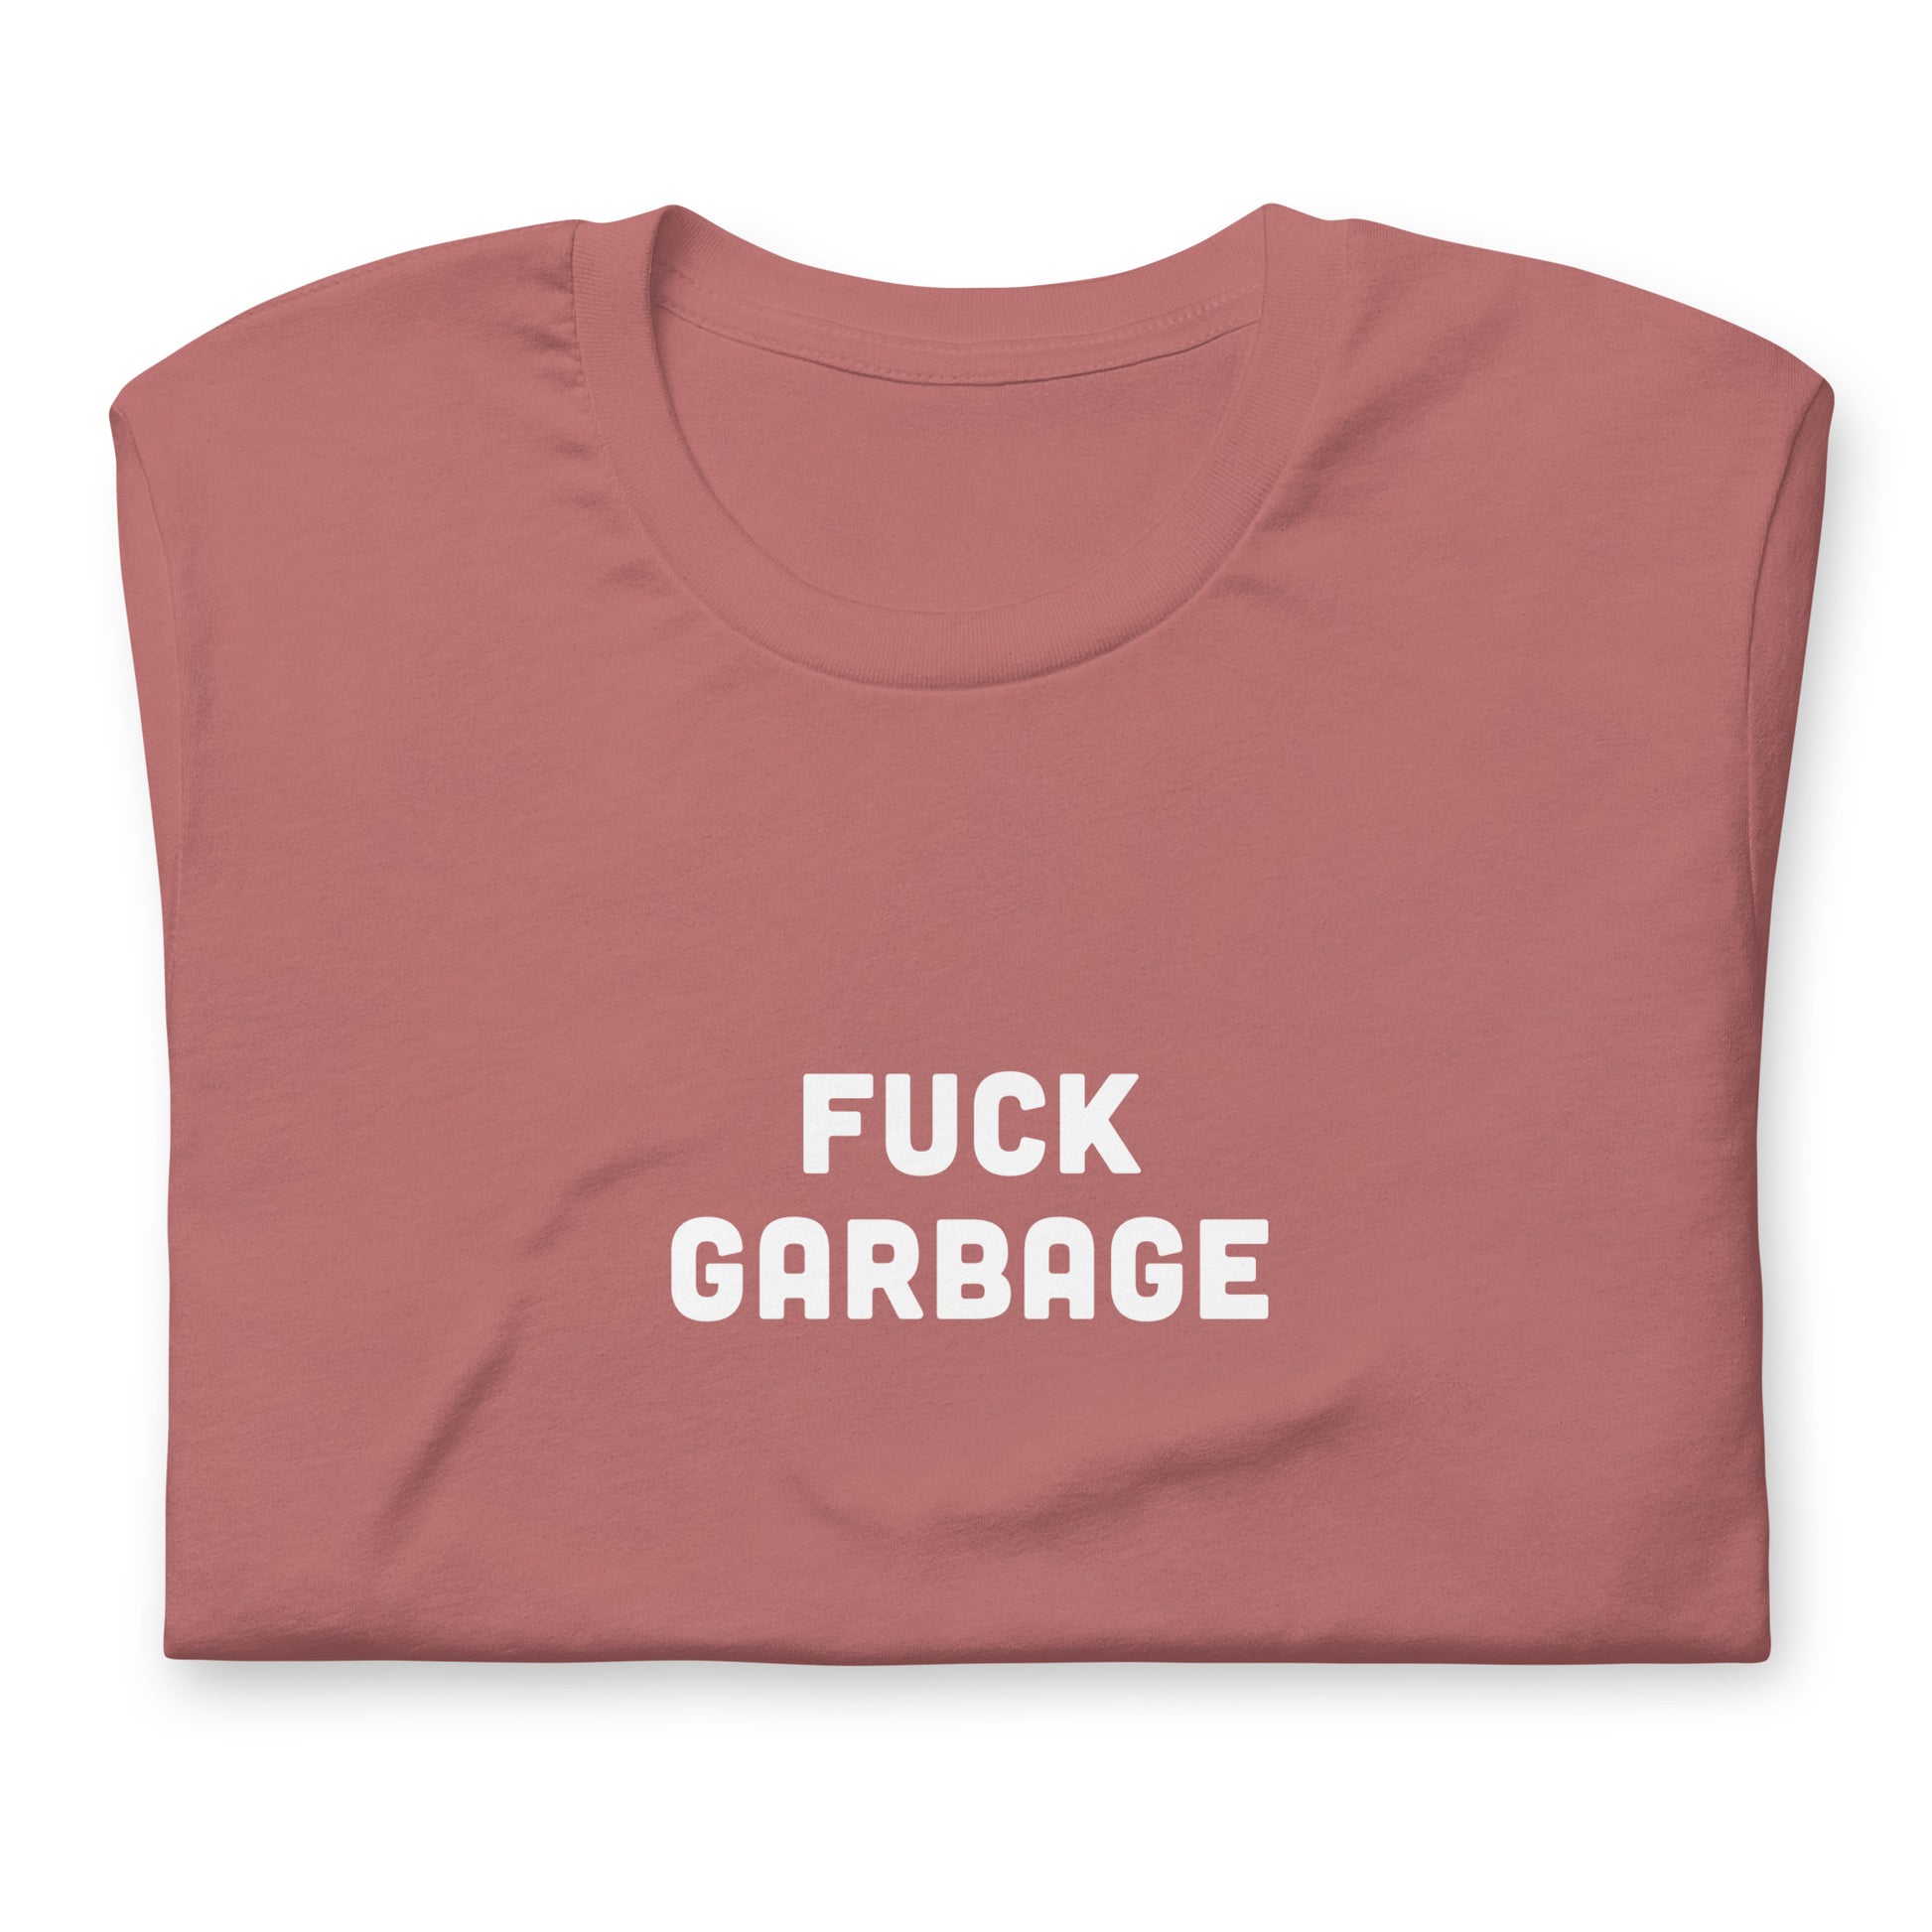 Fuck Garbage T-Shirt Size XL Color Navy